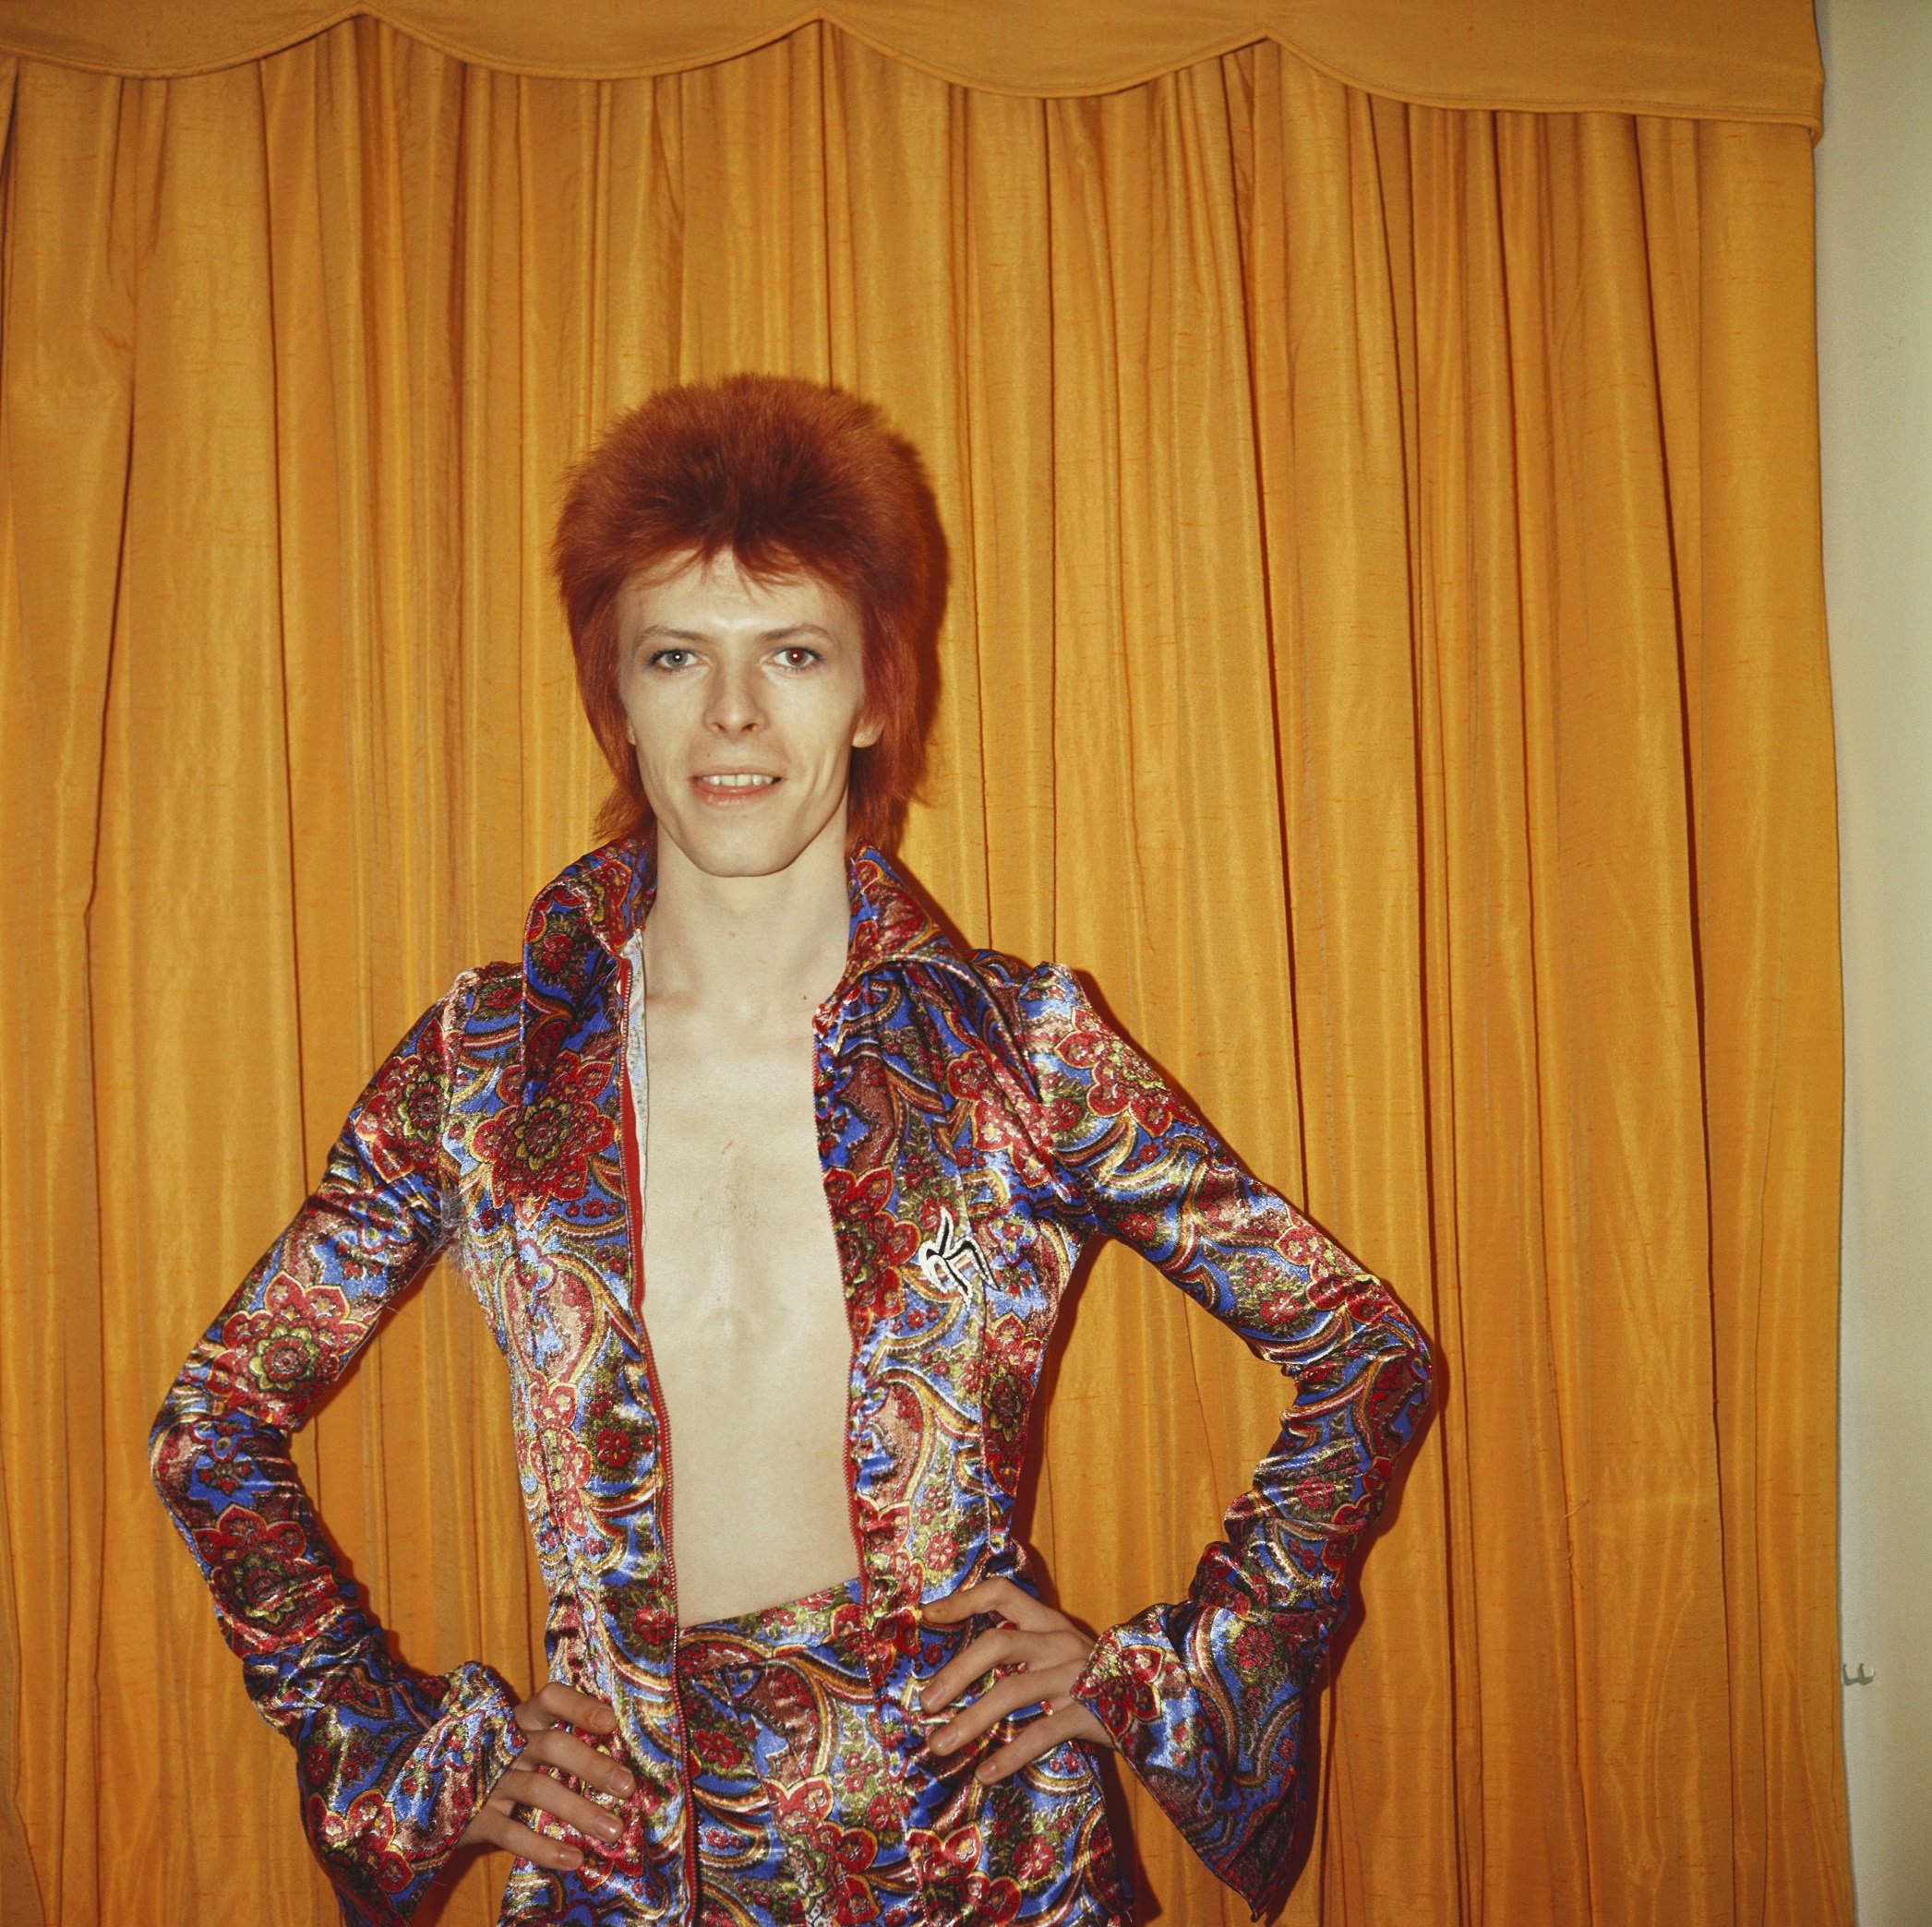 David Bowie in front of a curtain